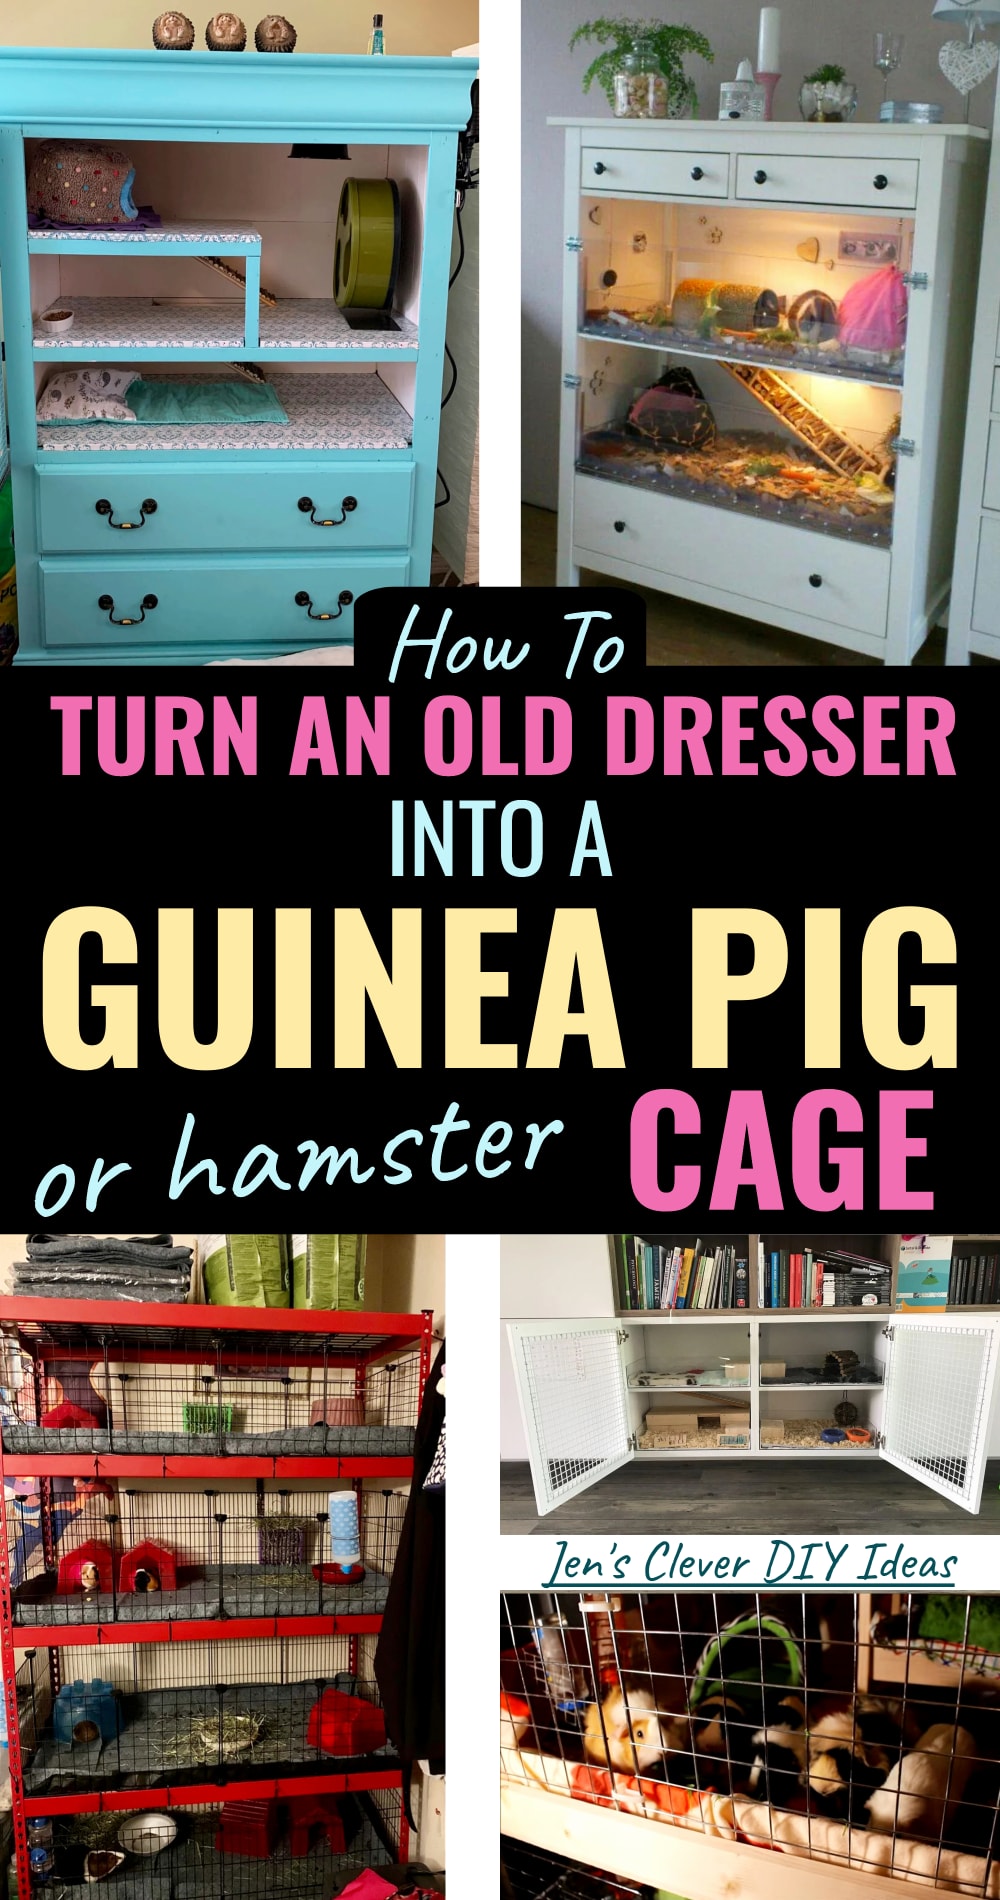 guinea pig cage ideas - how to make a hutch house for your pet guinea pigs from an old dresser